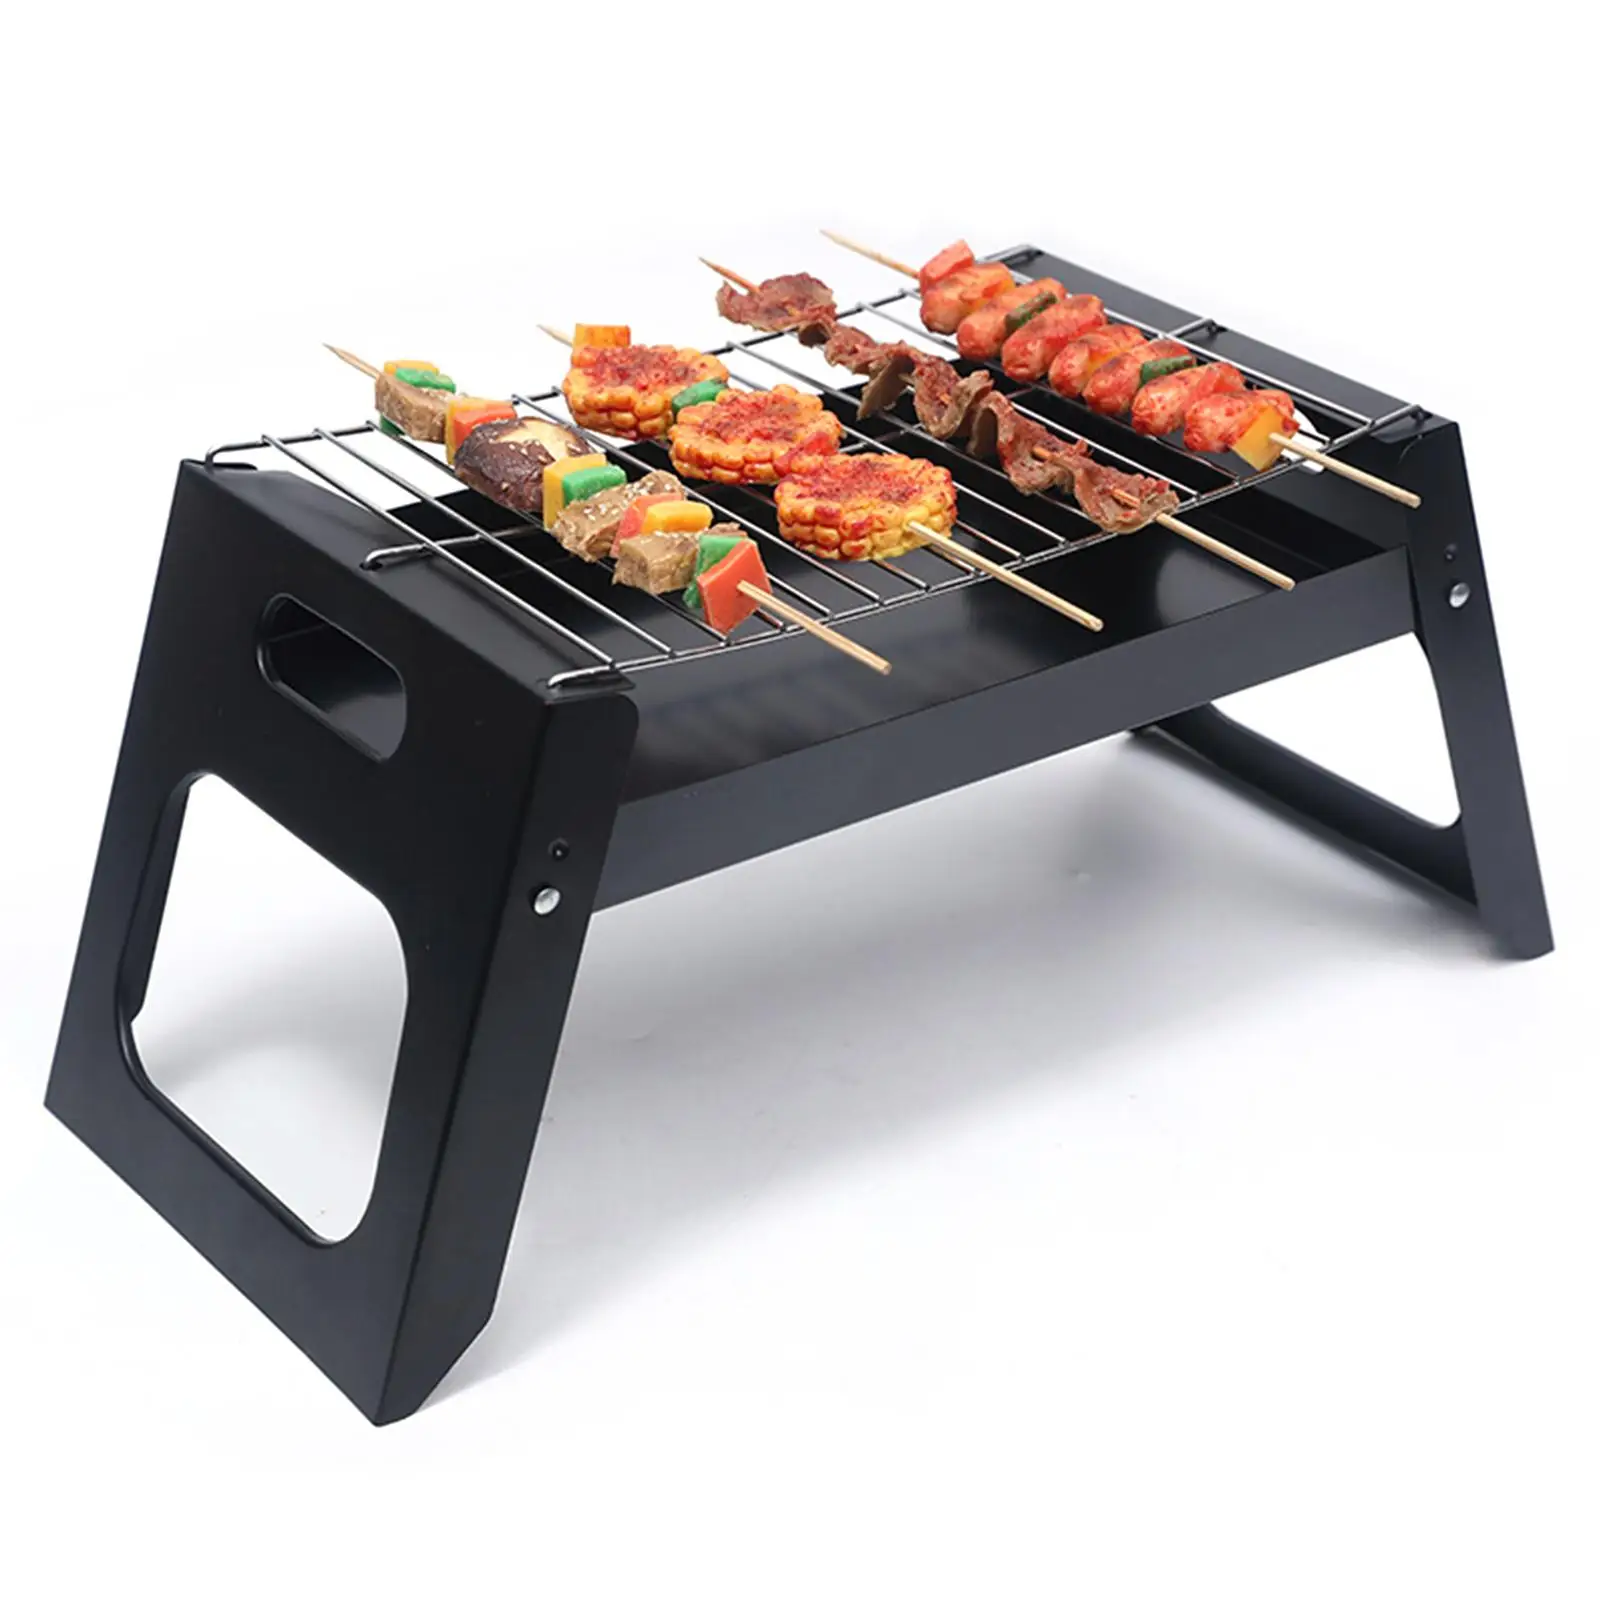 Portable Foldable for Backpacking Barbecue Supplies